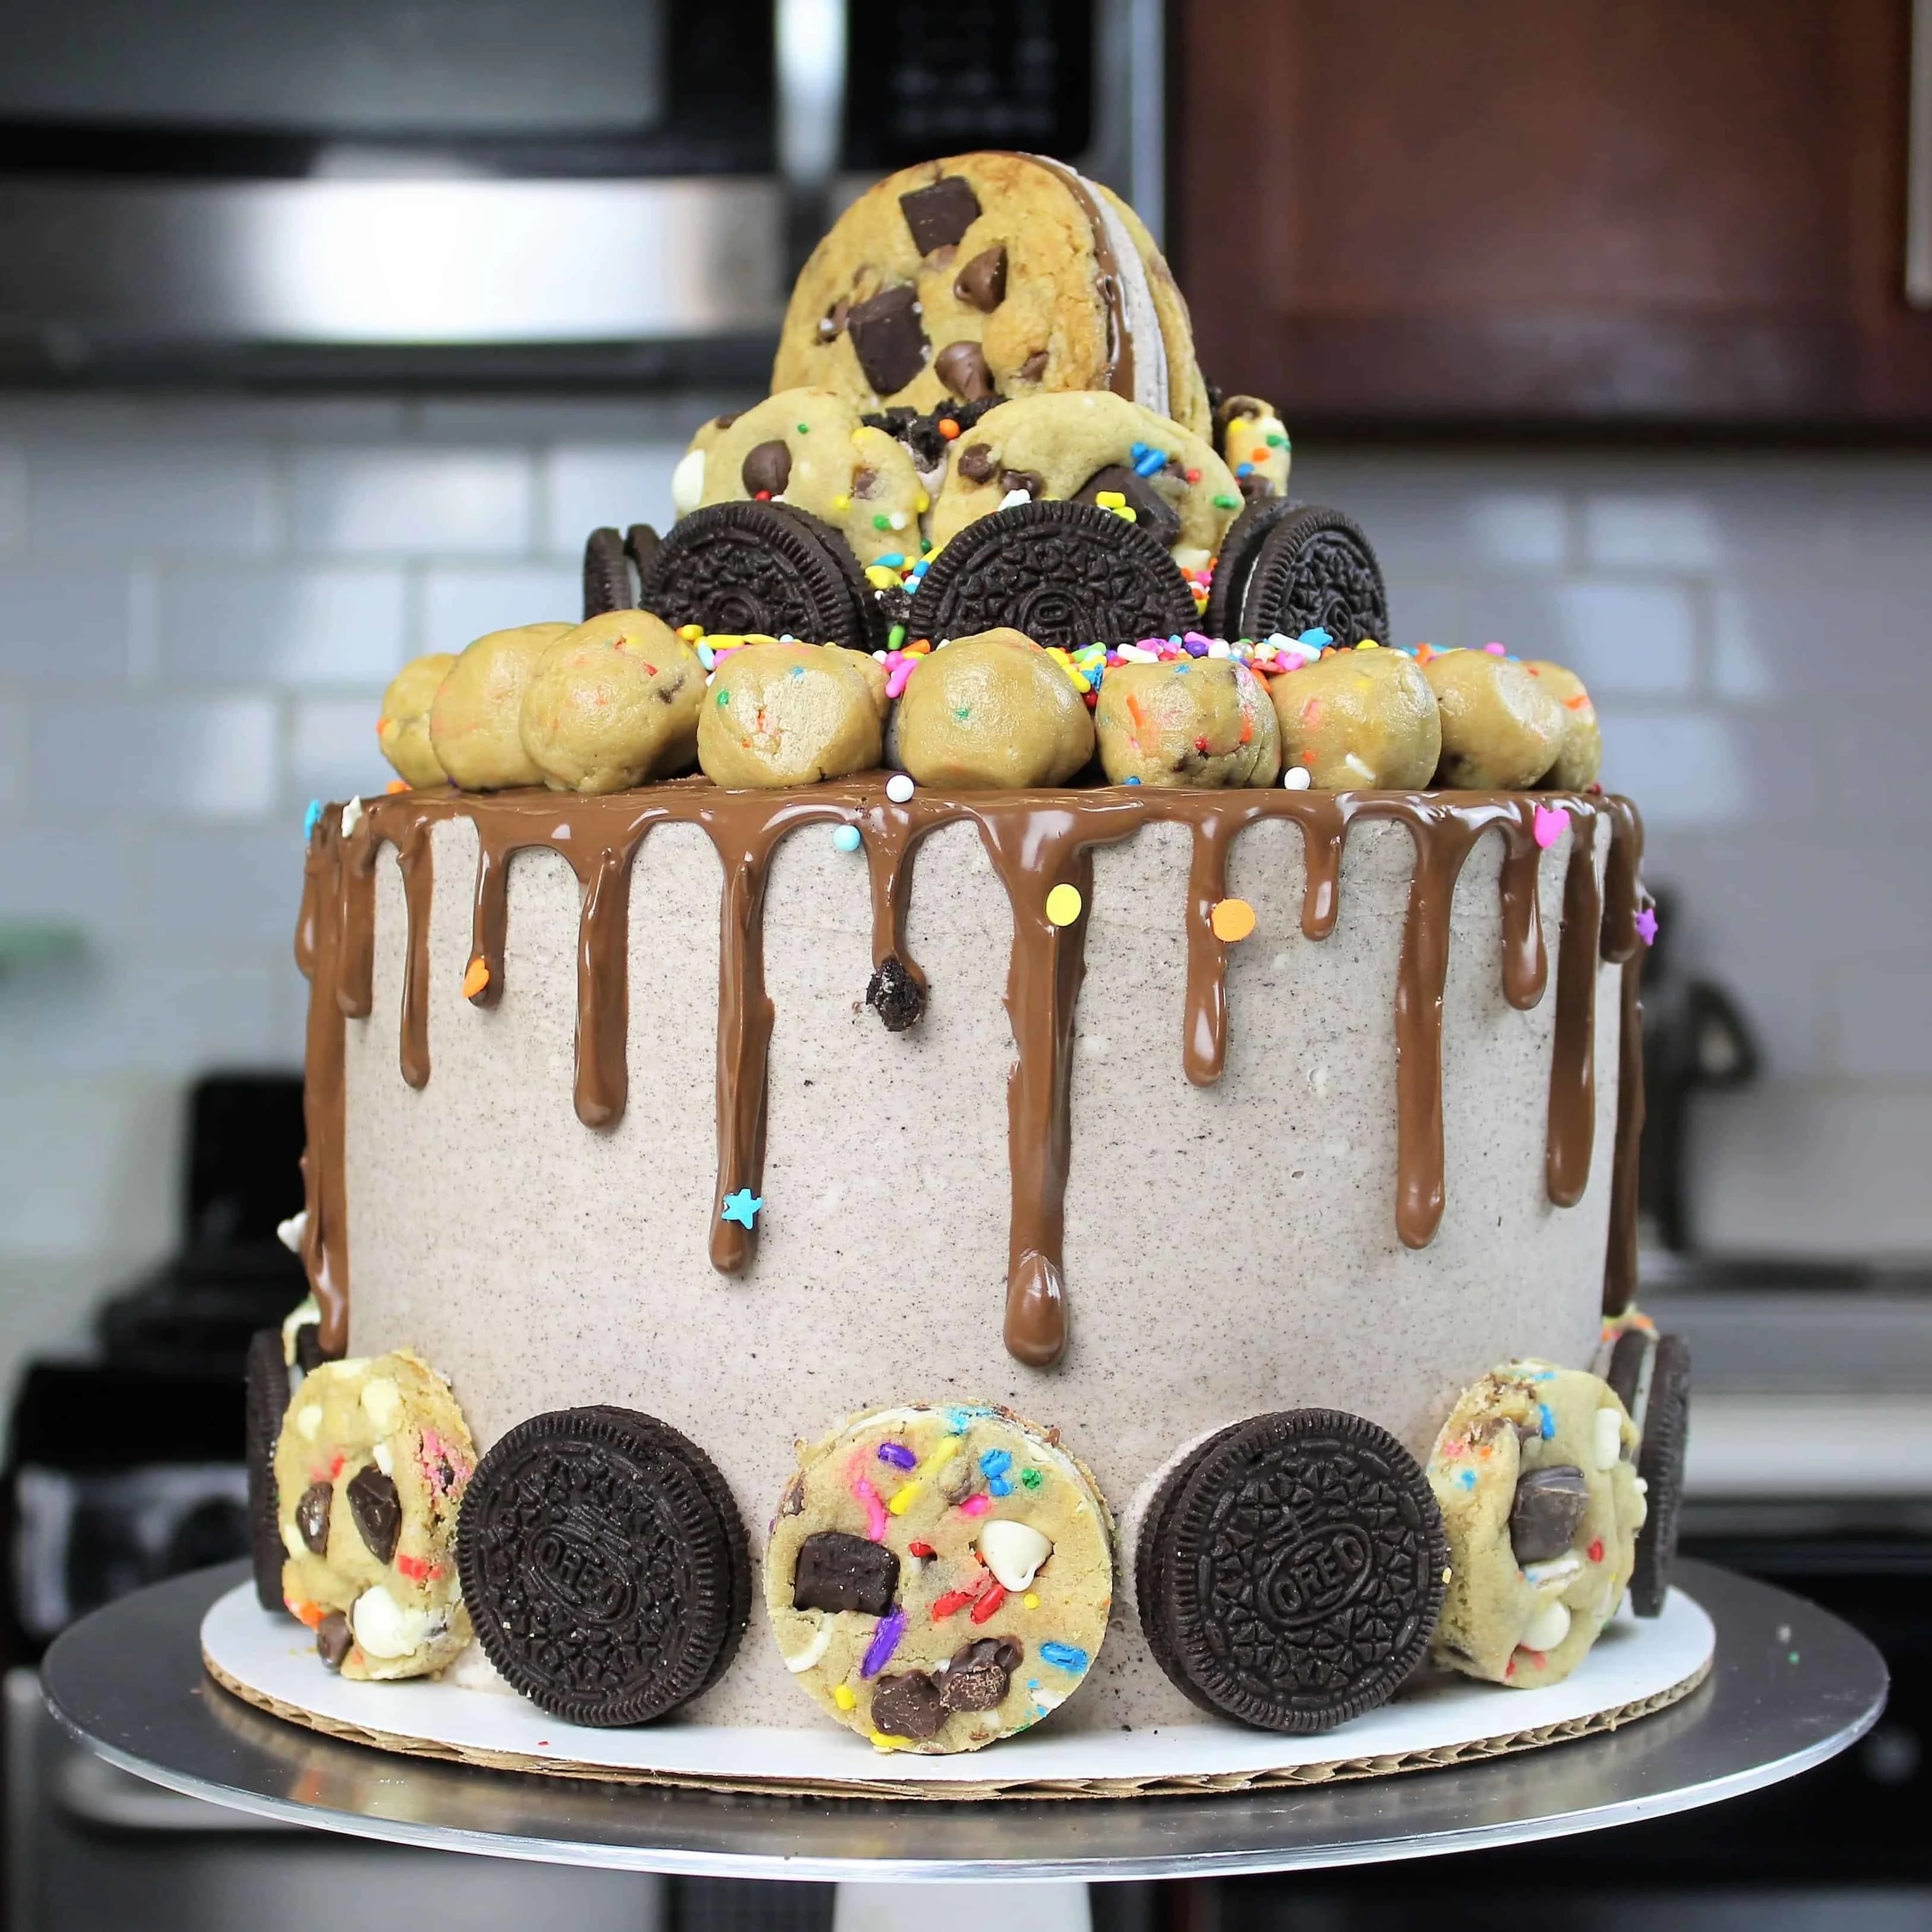 oreo cooke dough cake decorated with nutella buttercream and a nutella drip!